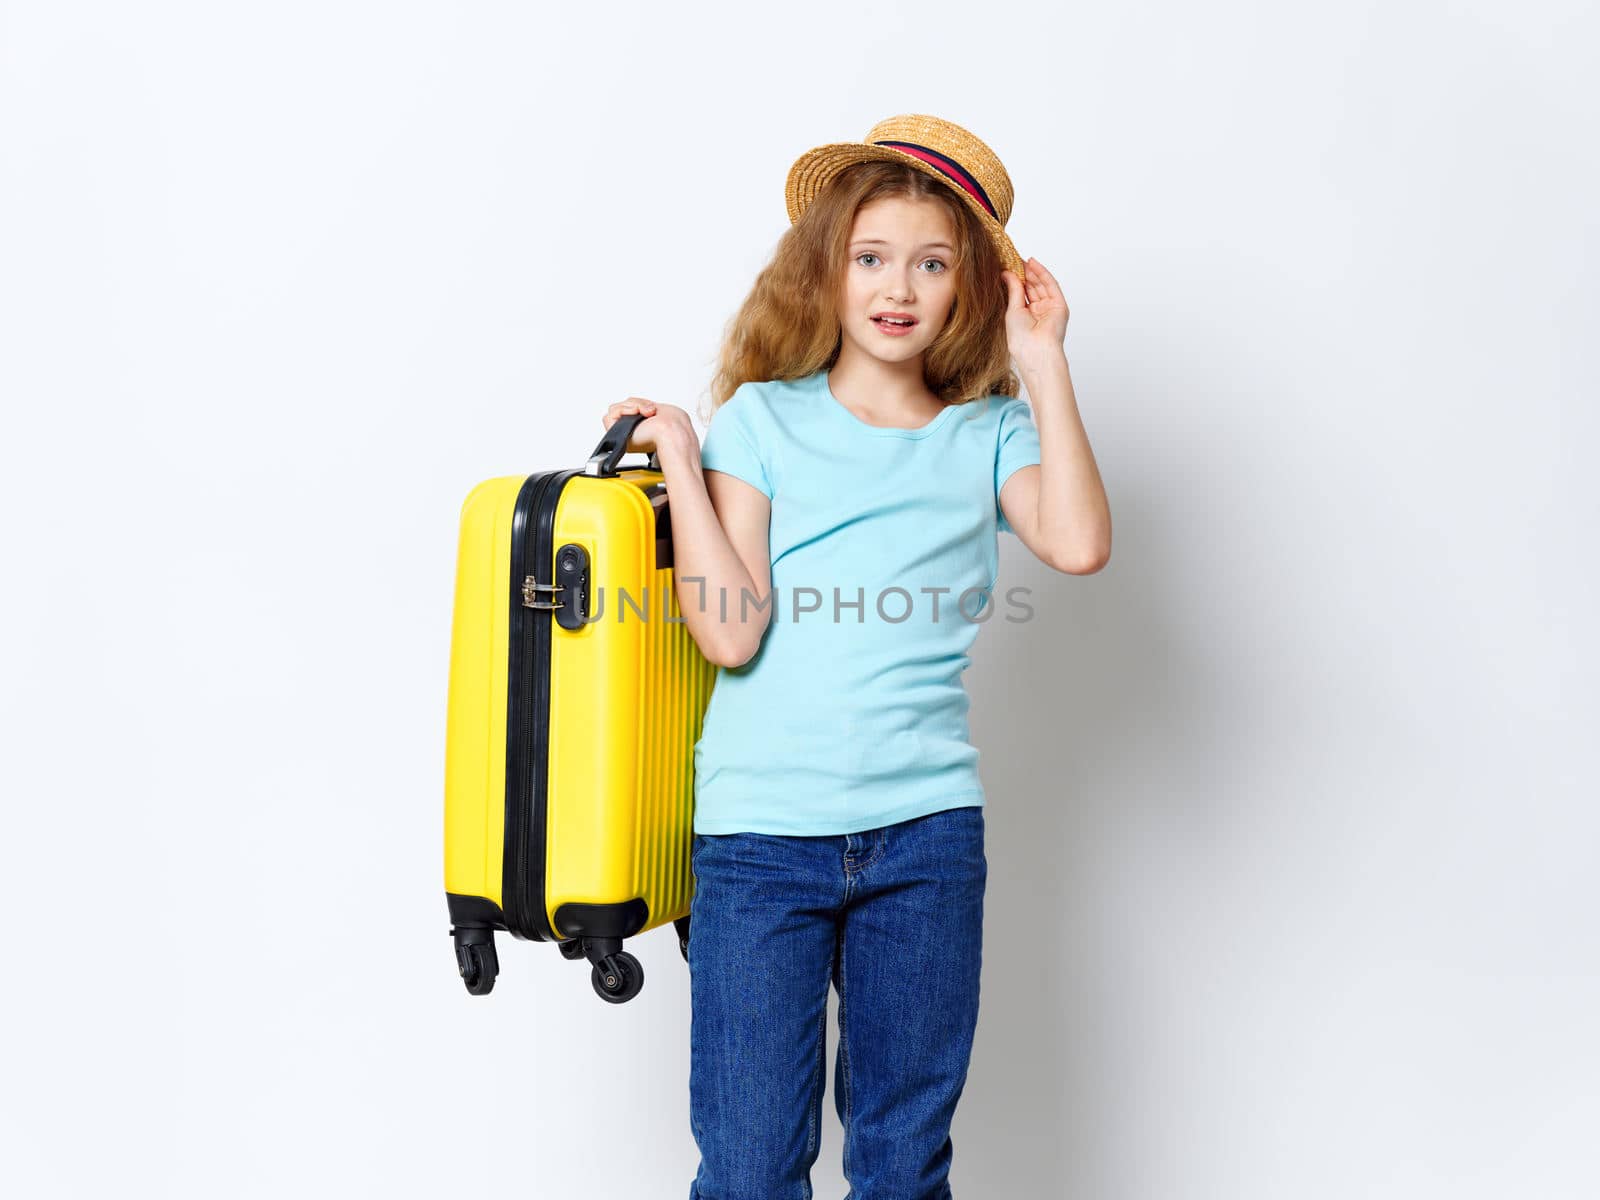 Girl Tourist yellow suitcase vacation travel hat on head